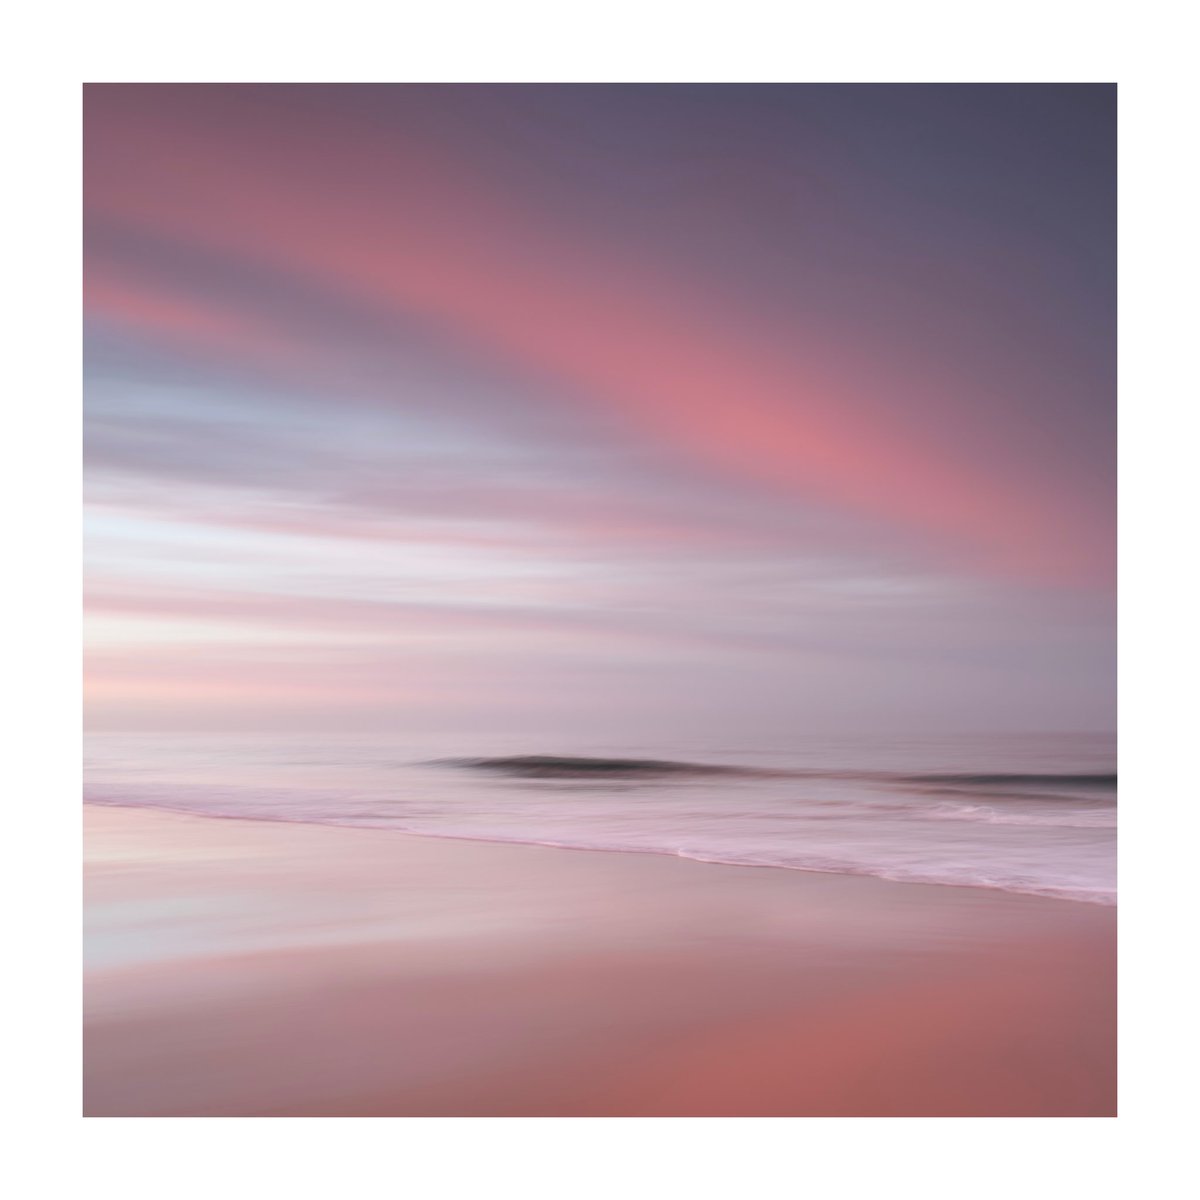 I’ve finally started to work through some of the many very pink raw files from this amazing sunset back in January! #icmphotography